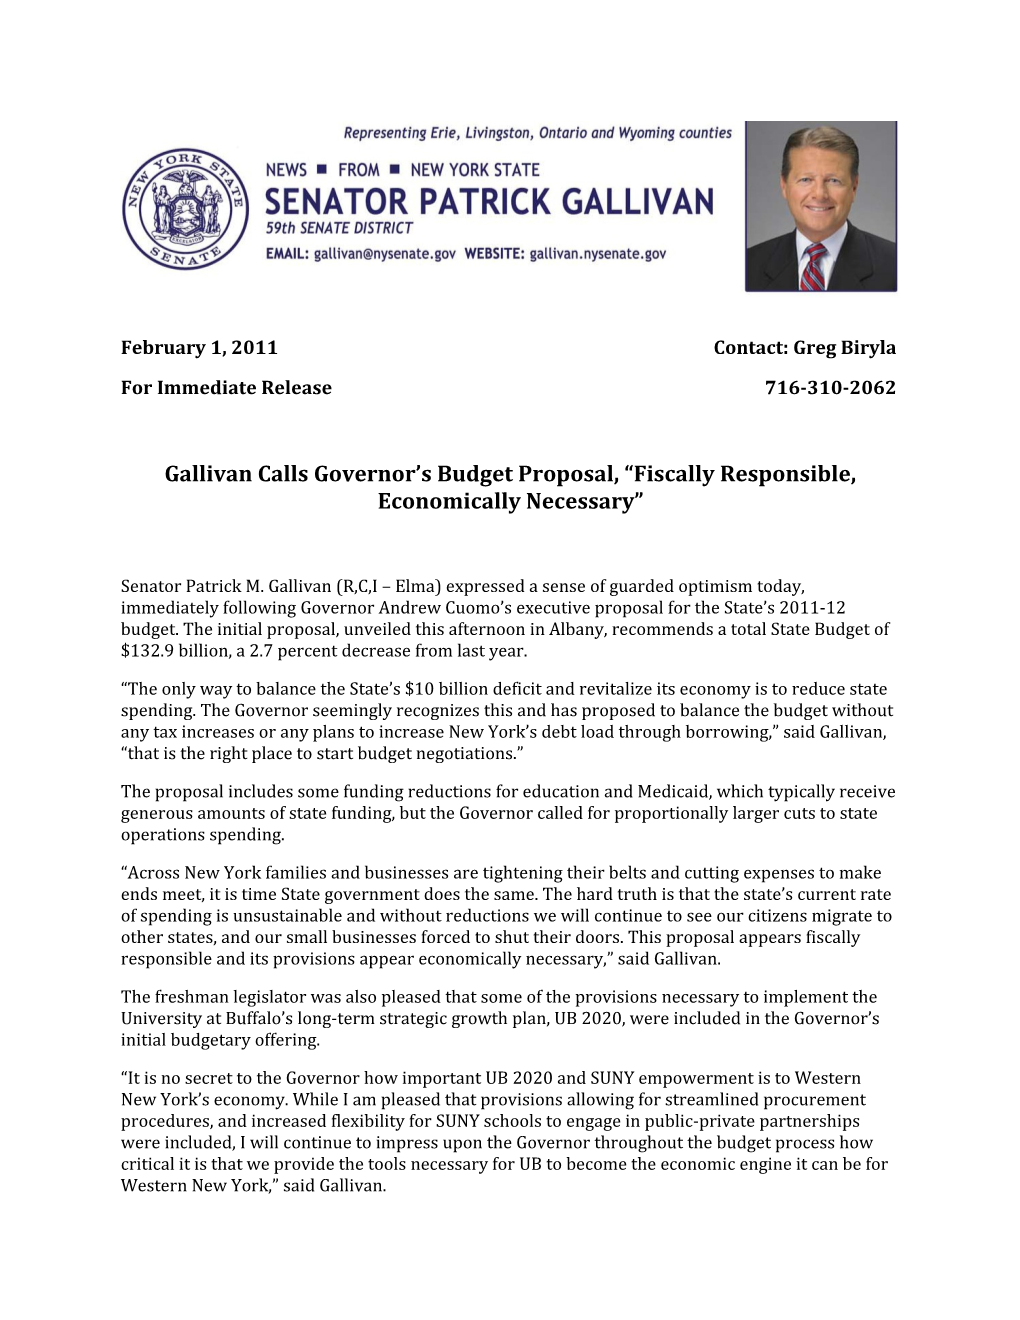 Gallivan Calls Governor S Budget Proposal, Fiscally Responsible, Economically Necessary